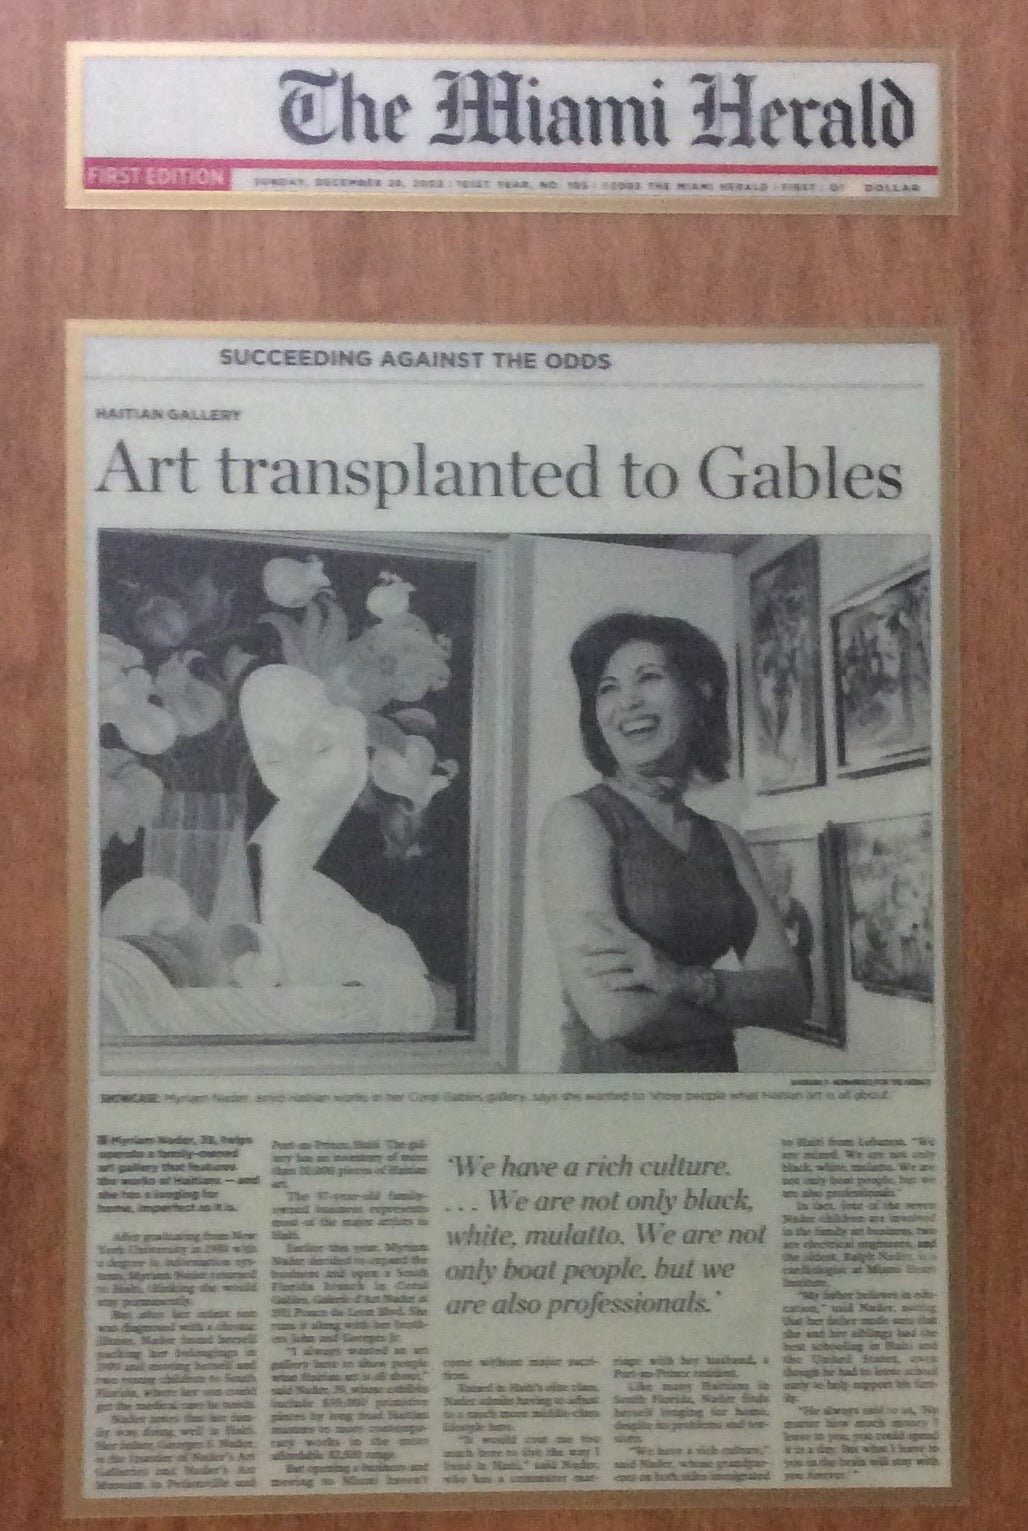 Myriam Nader in the Miami Herald - Art Transplanted To Gables - Succeeding Against the Odds By Jacqueline Charles, Dec 2003